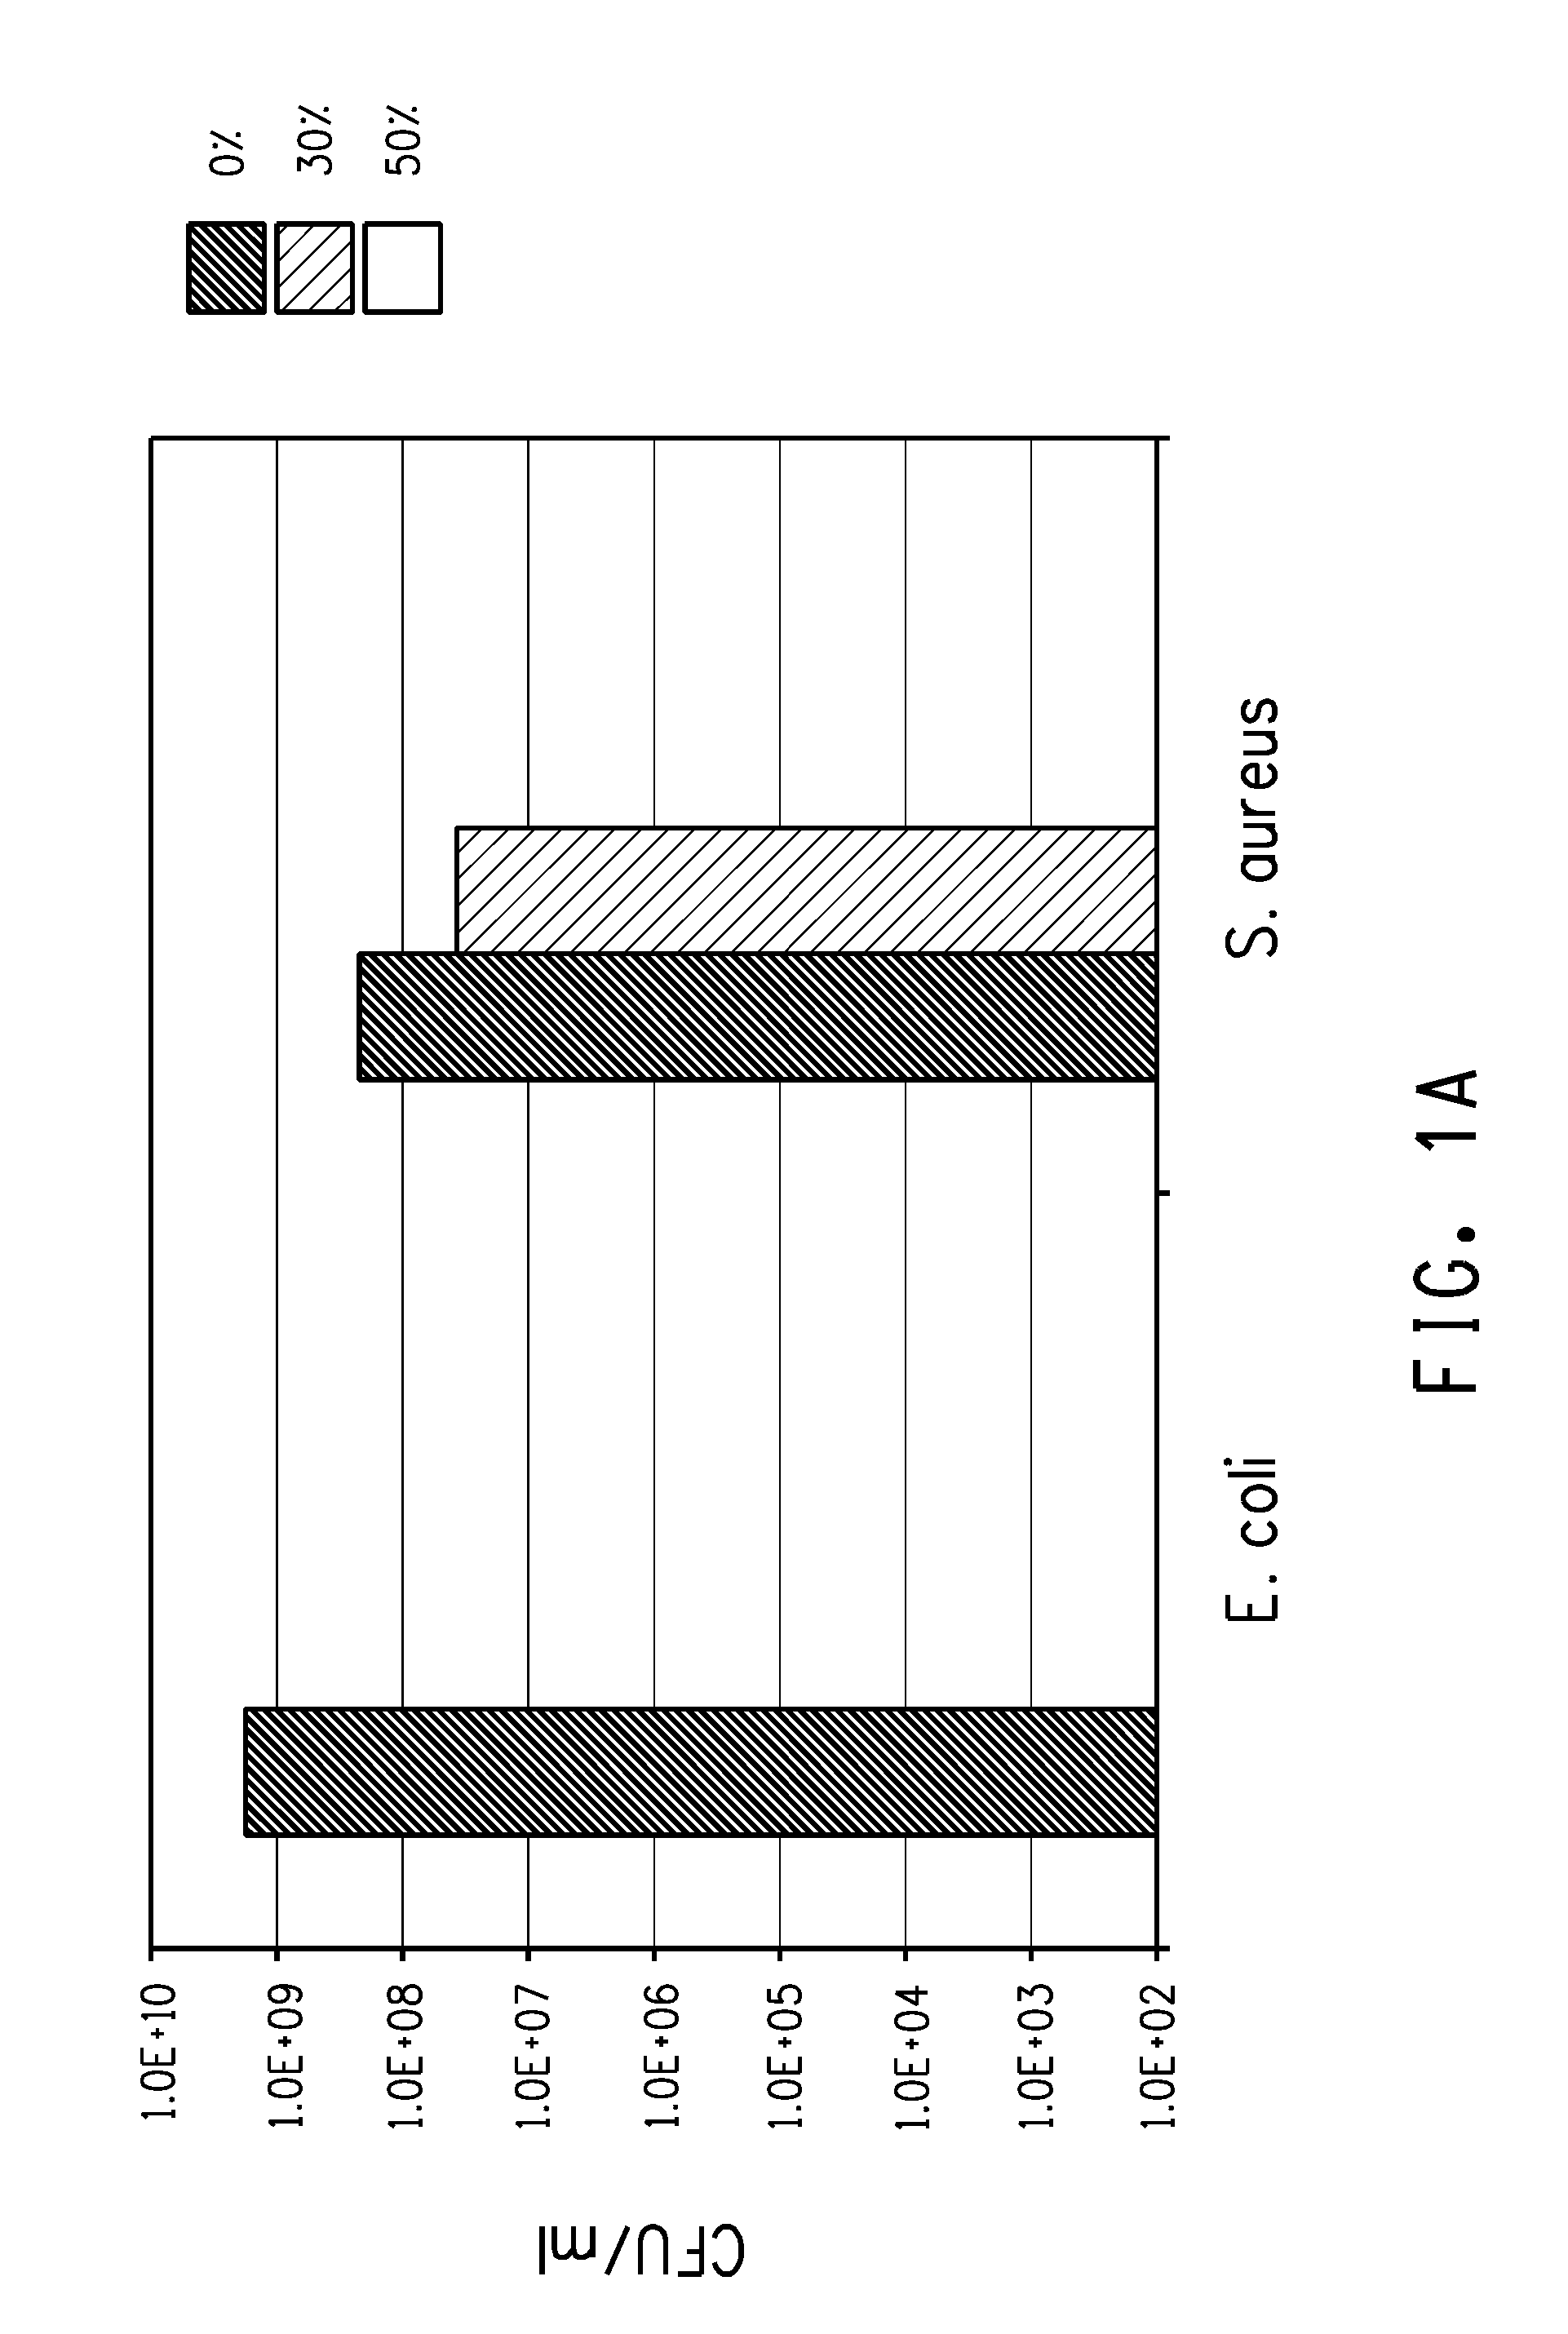 Antimicrobial compositions comprising trimethylene glycol oligomer and methods of using the compositions